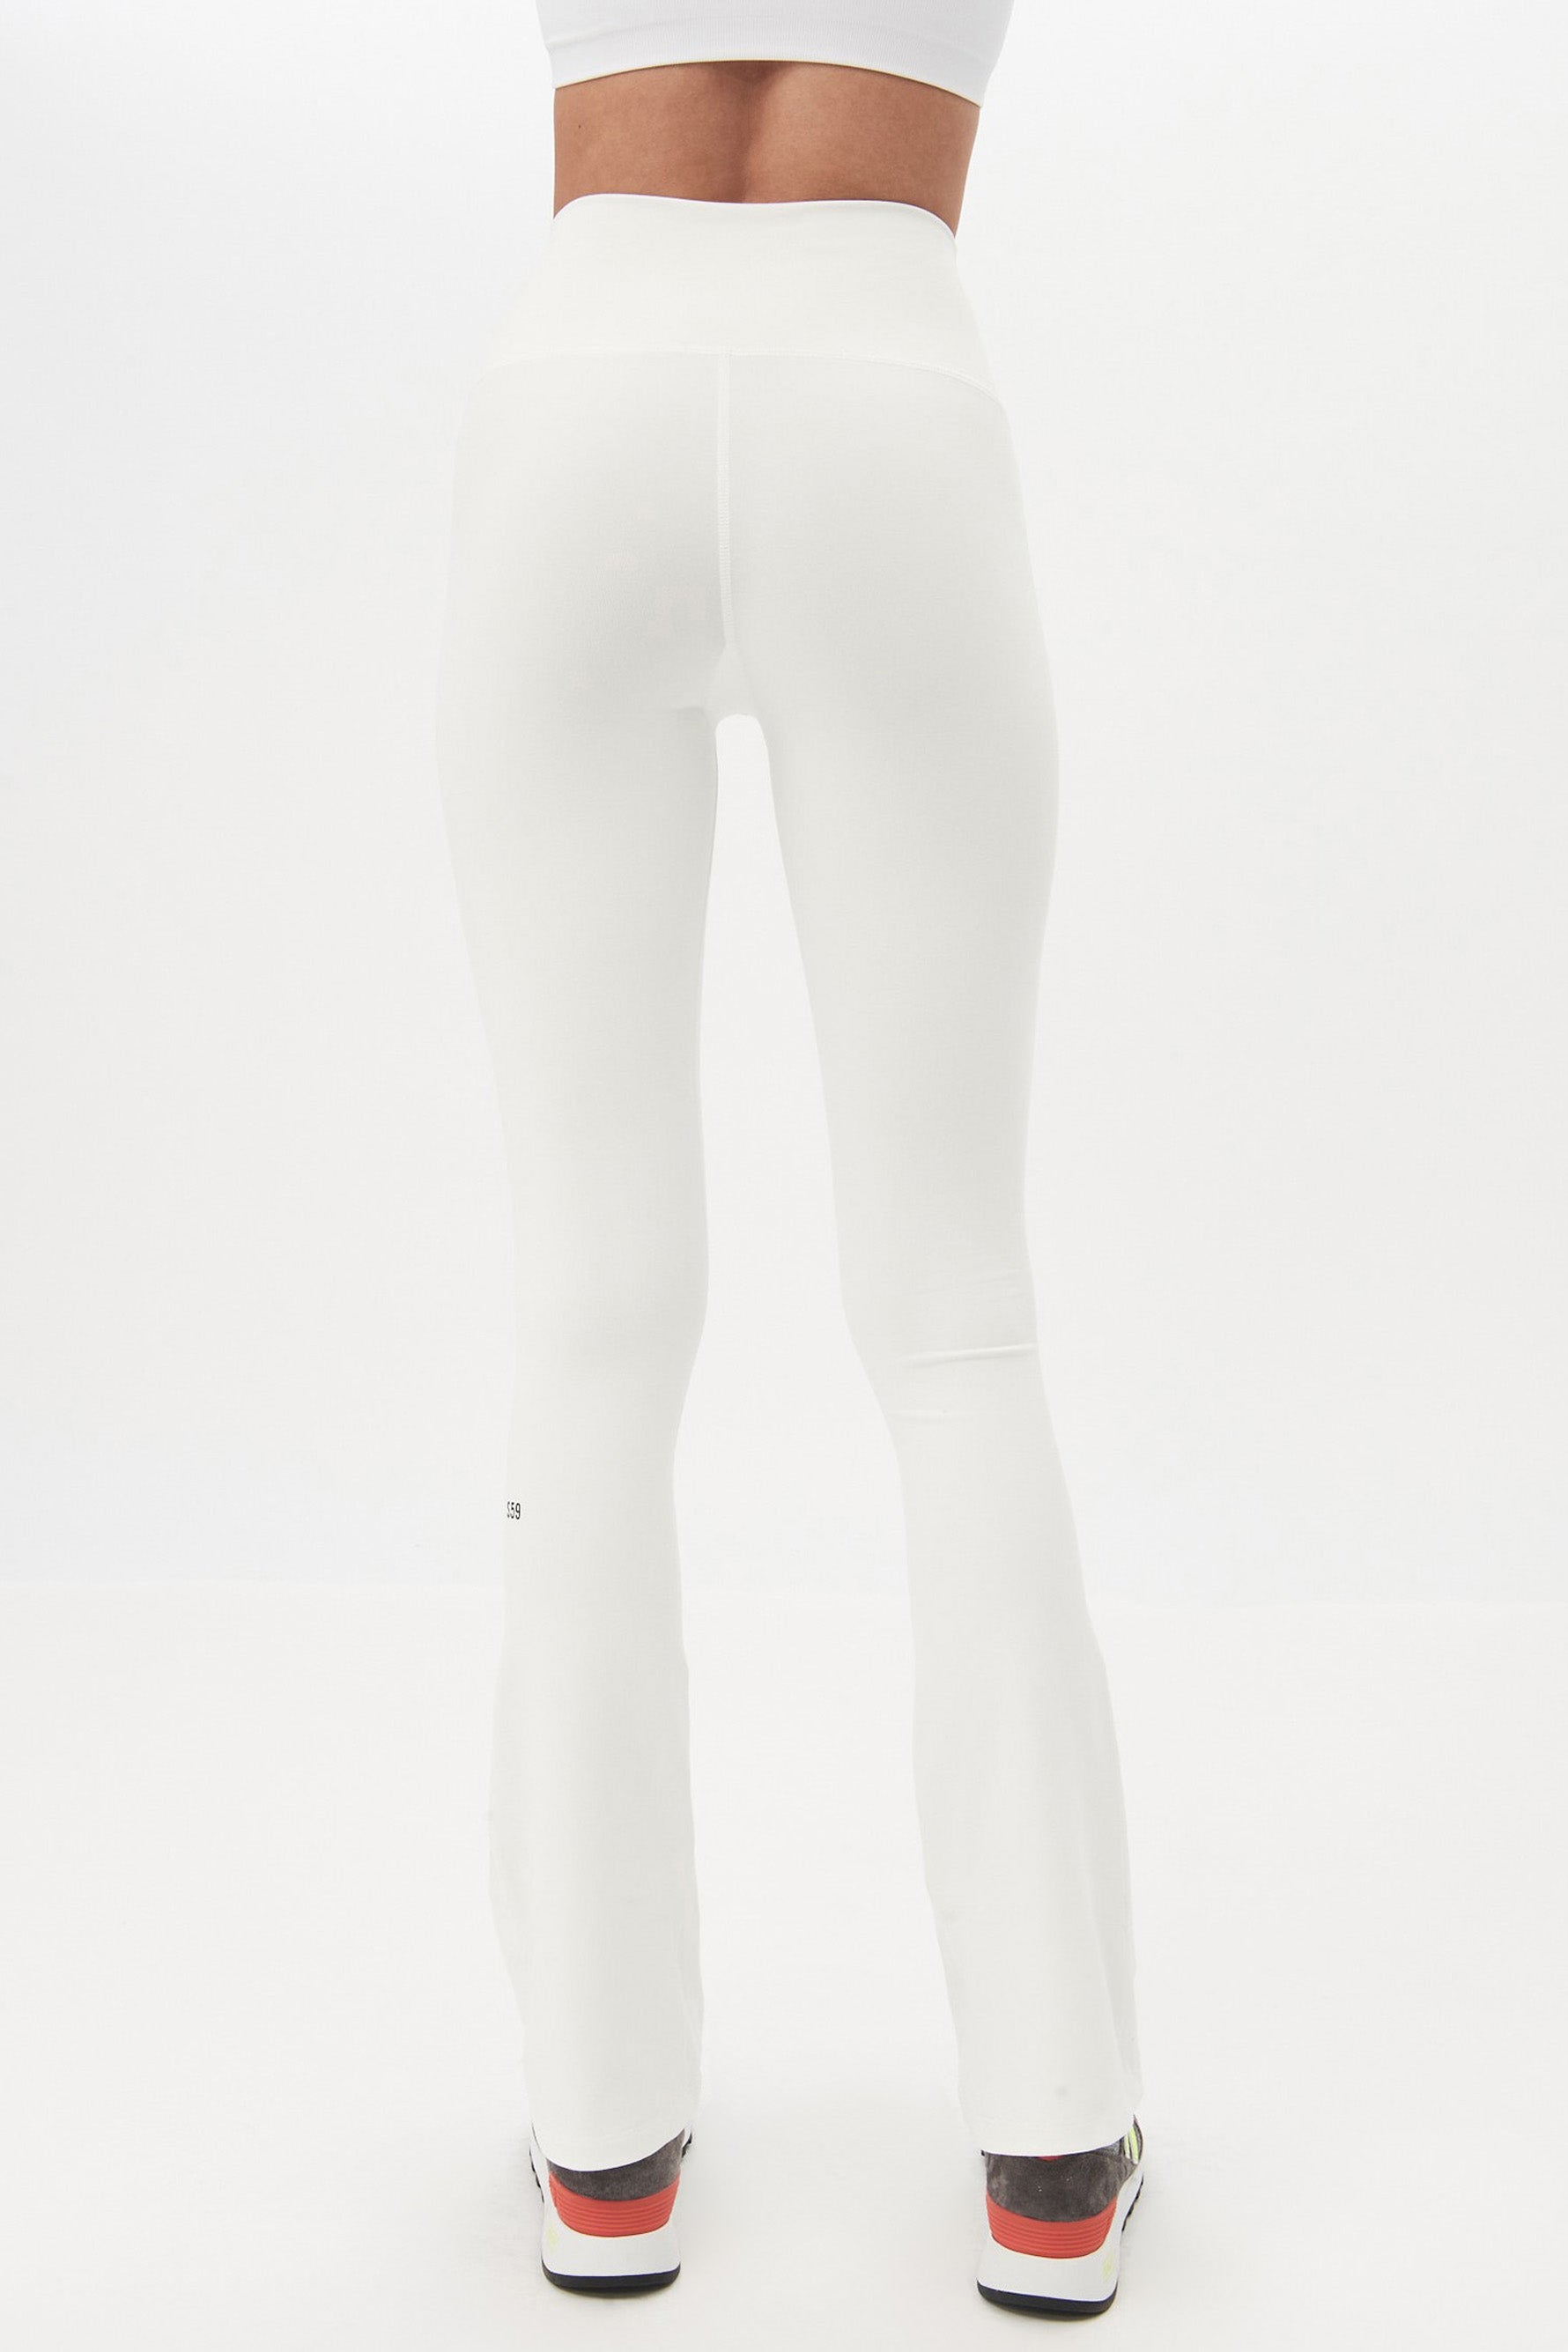 Splits59 Raquel High-Waisted Split Hem Flare Pant  Urban Outfitters Mexico  - Clothing, Music, Home & Accessories